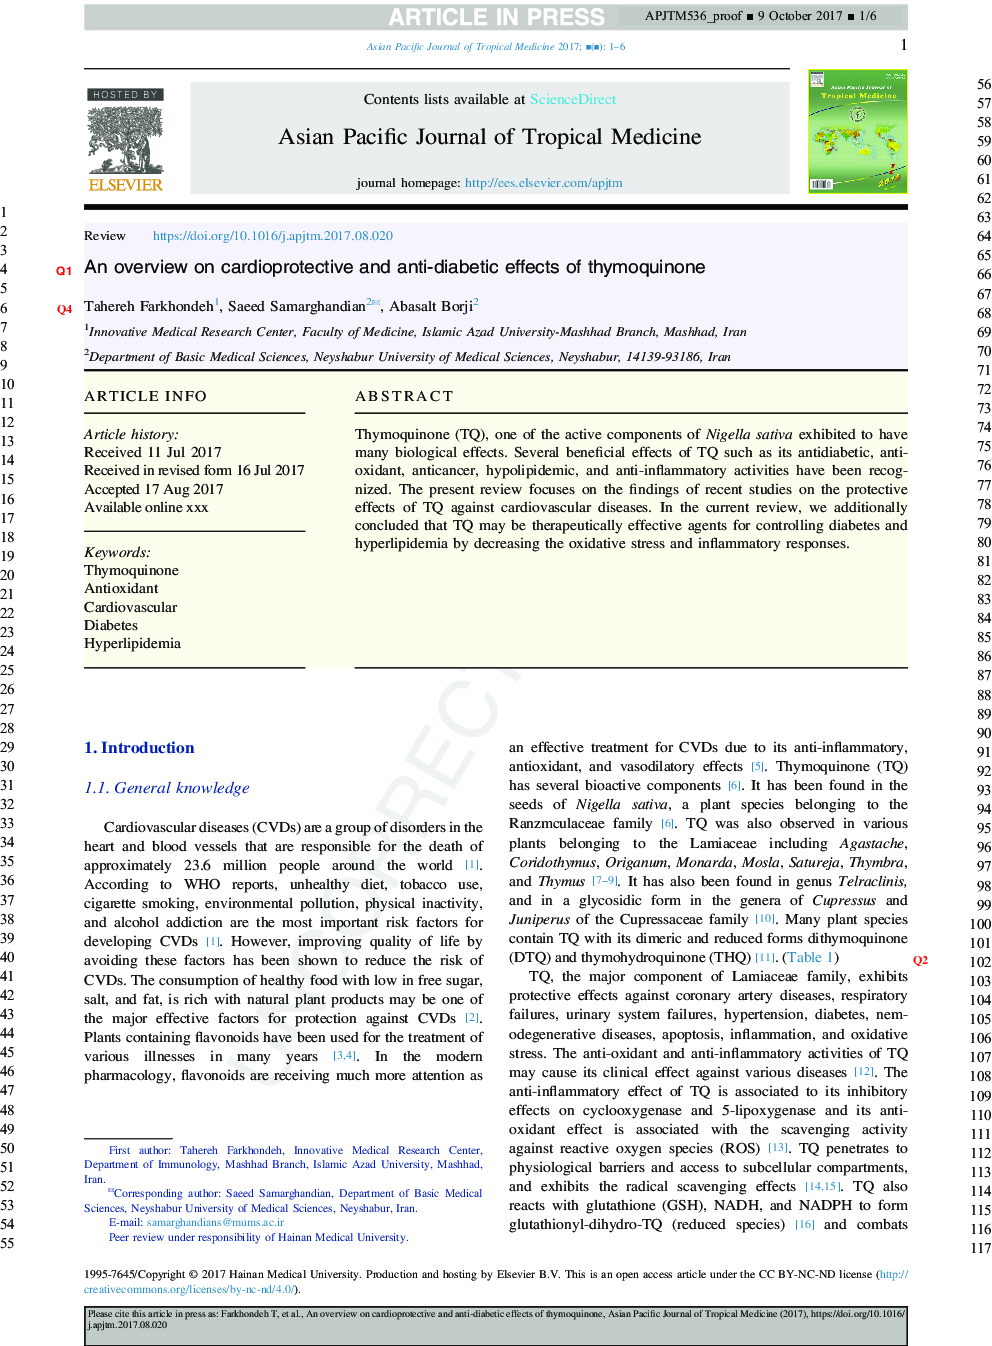 An overview on cardioprotective and anti-diabetic effects of thymoquinone